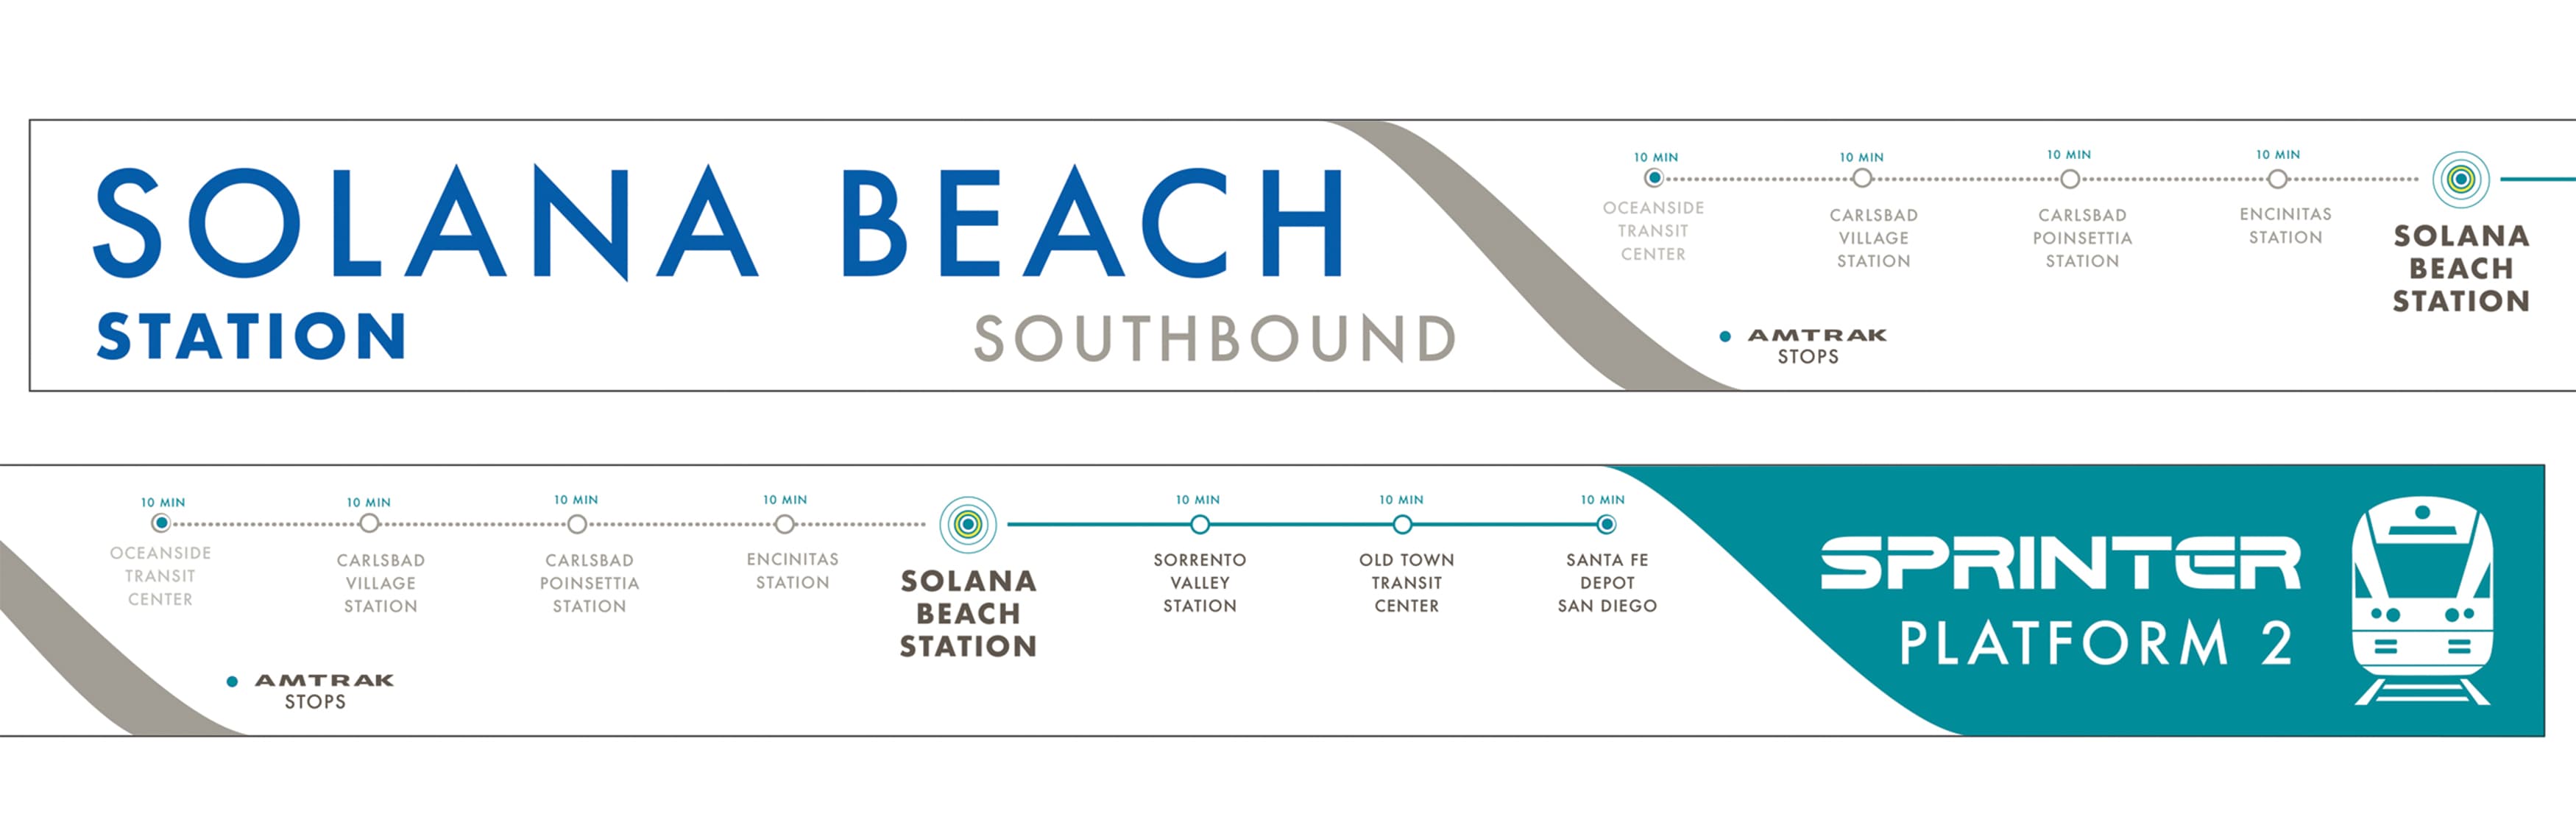 North County Transit District, the transit system in northern San Diego, California, worked with RSM Design to re-think what their transit system looks like. Transit map wayfinding system.